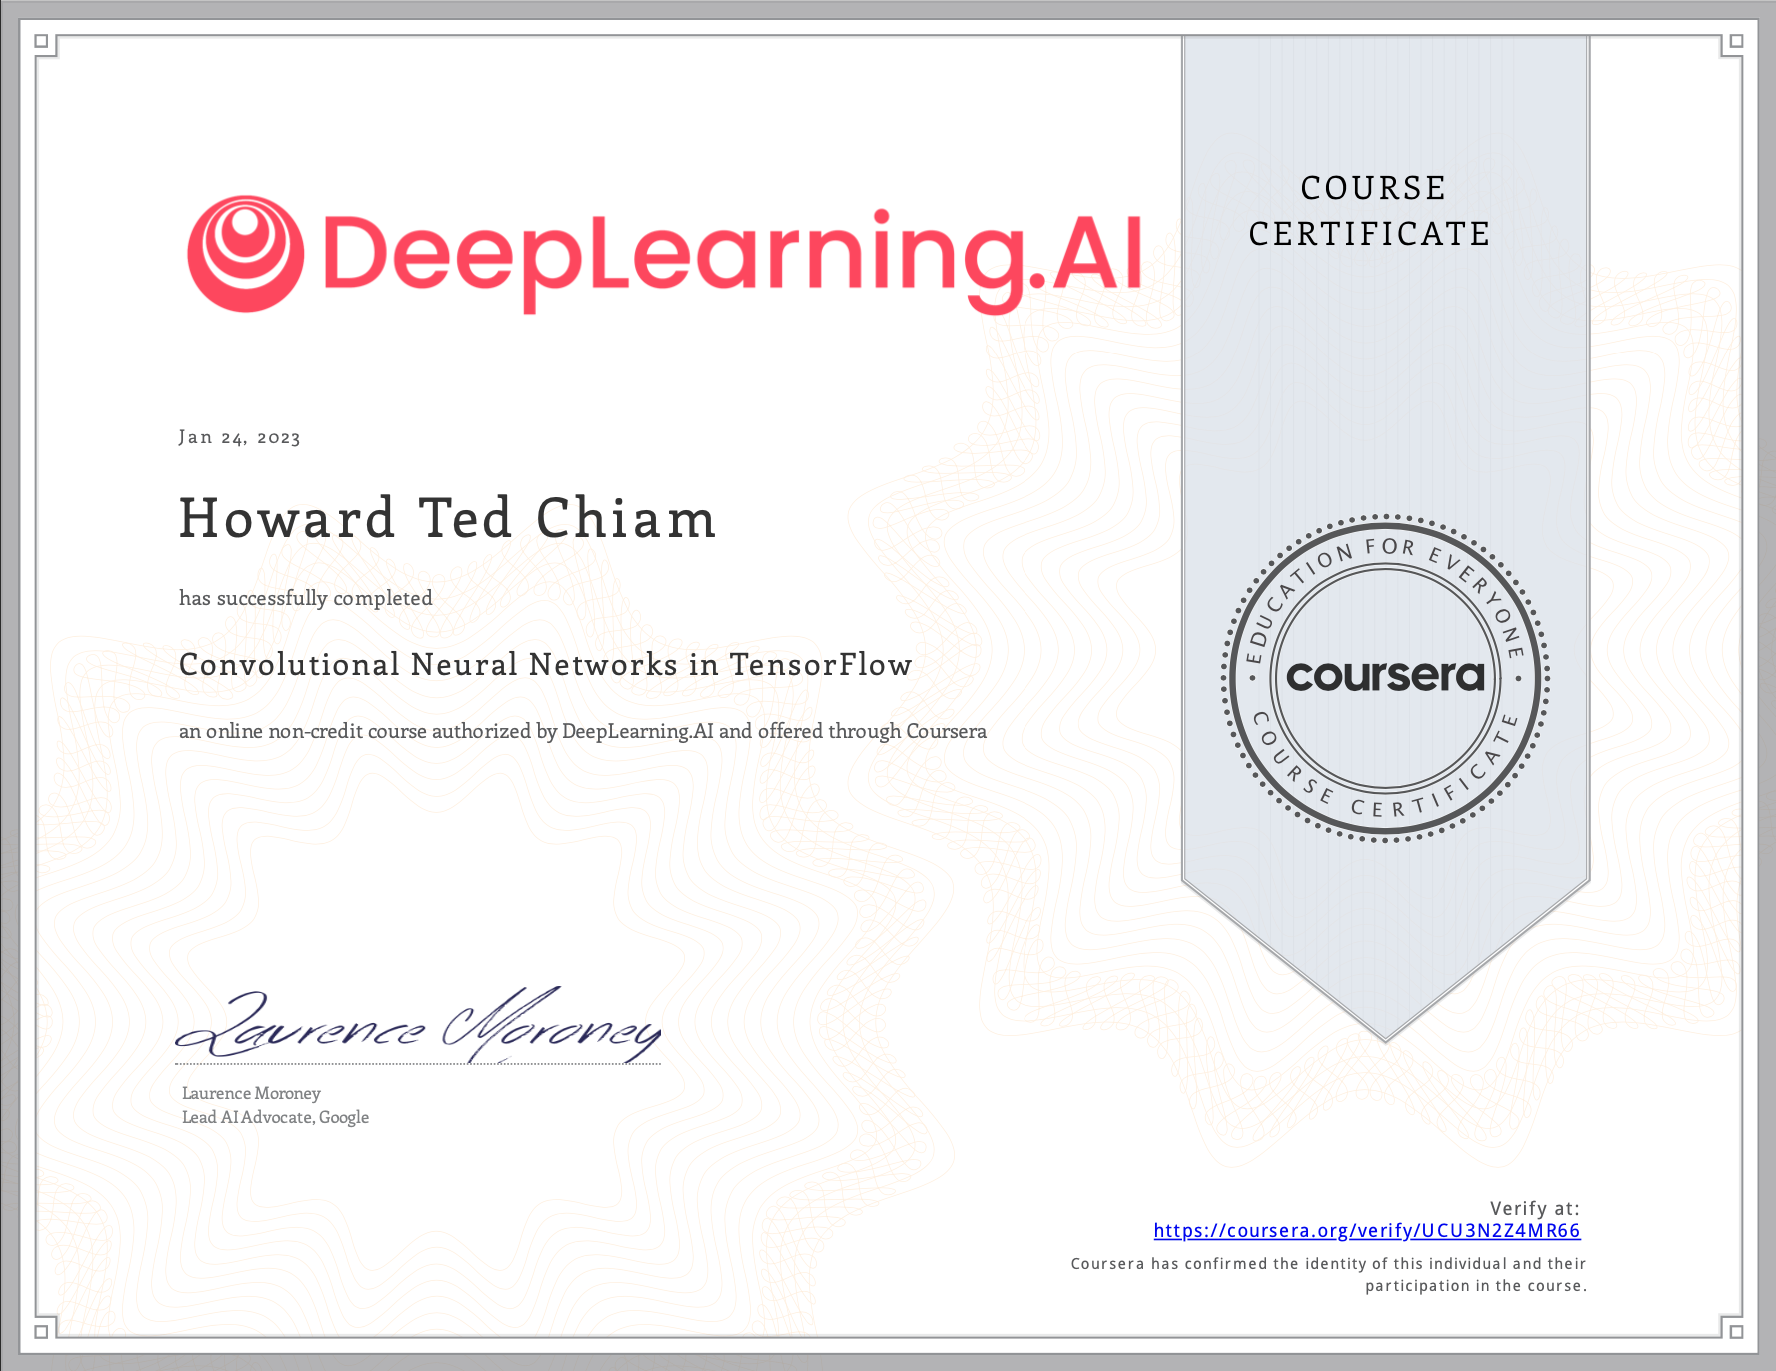 PDF Certificate for DeepLearning.AI's TensorFlow Course on Coursera on Convolutional Neural Networks